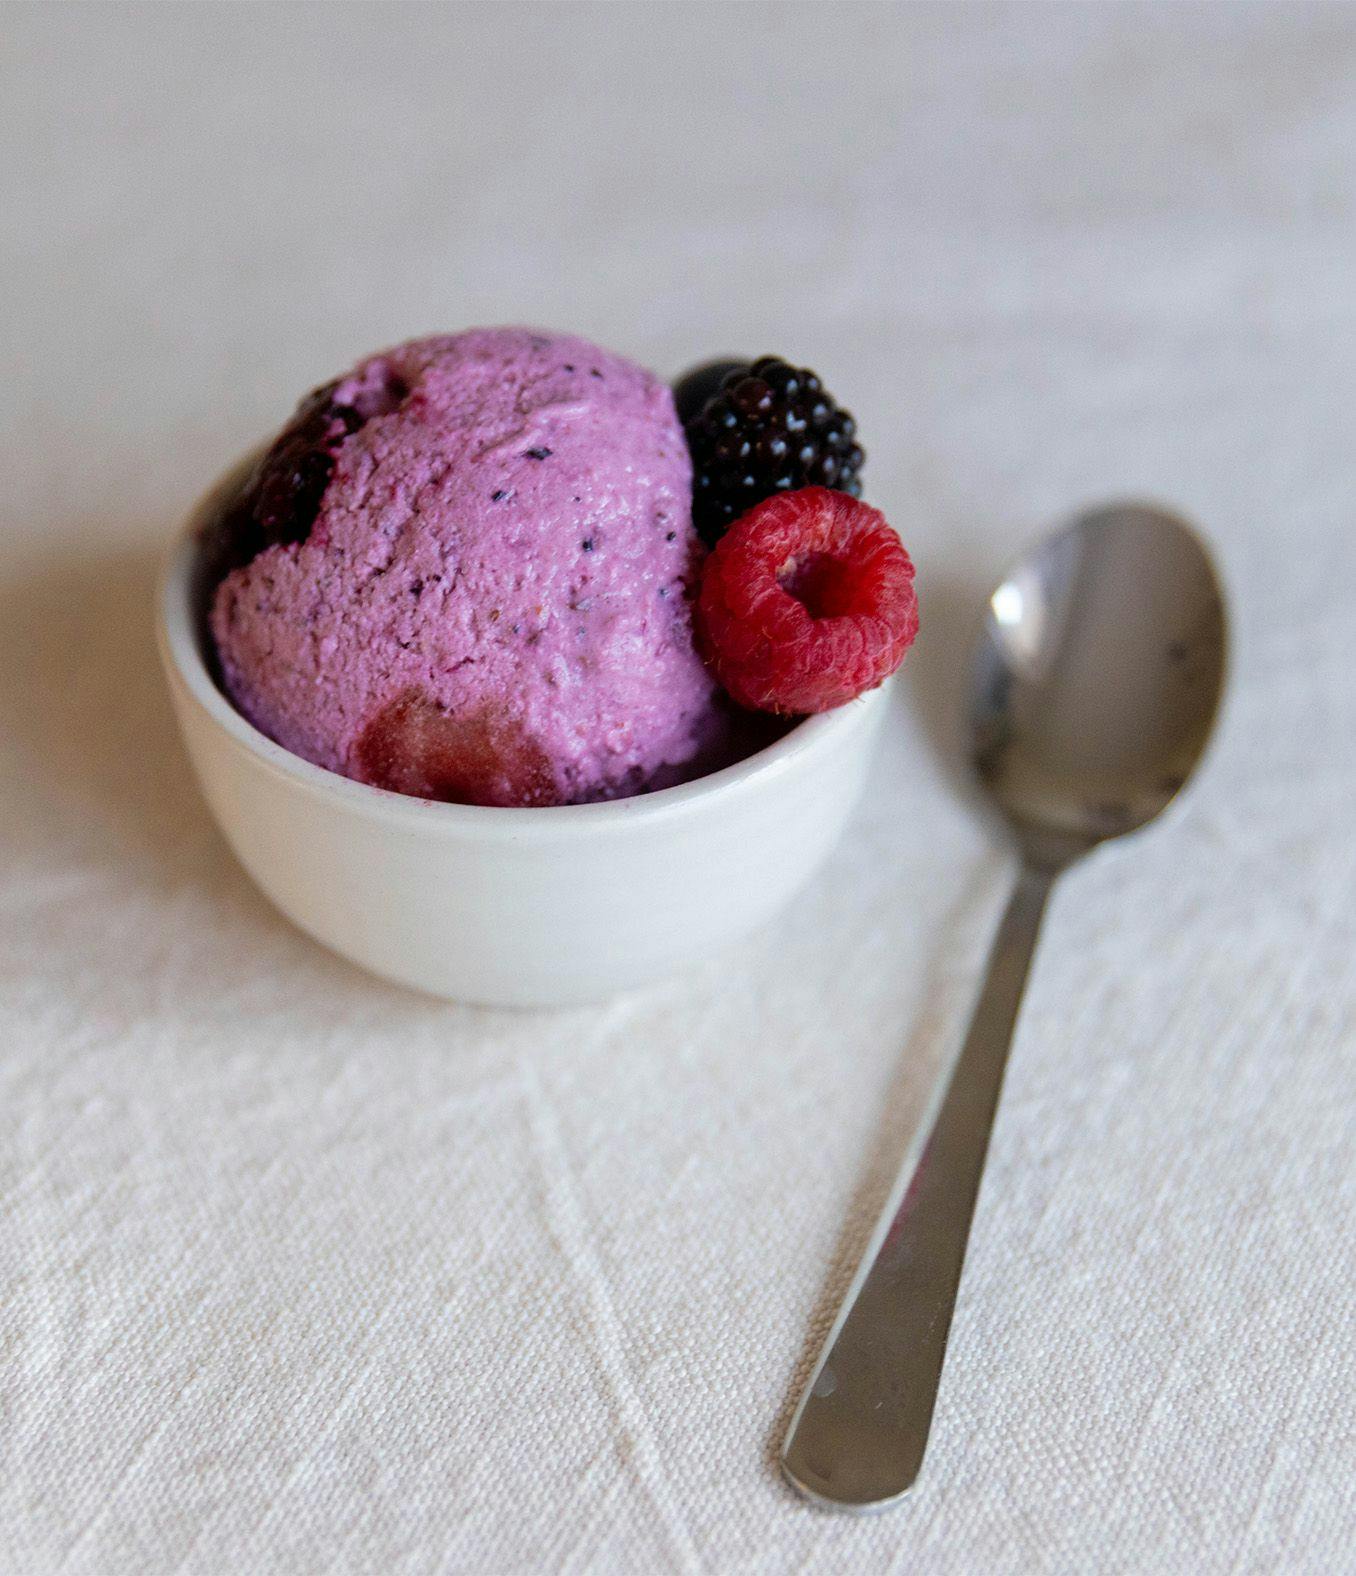 Scoop of cottage cheese ice cream in a dish with fresh berries and spoon.